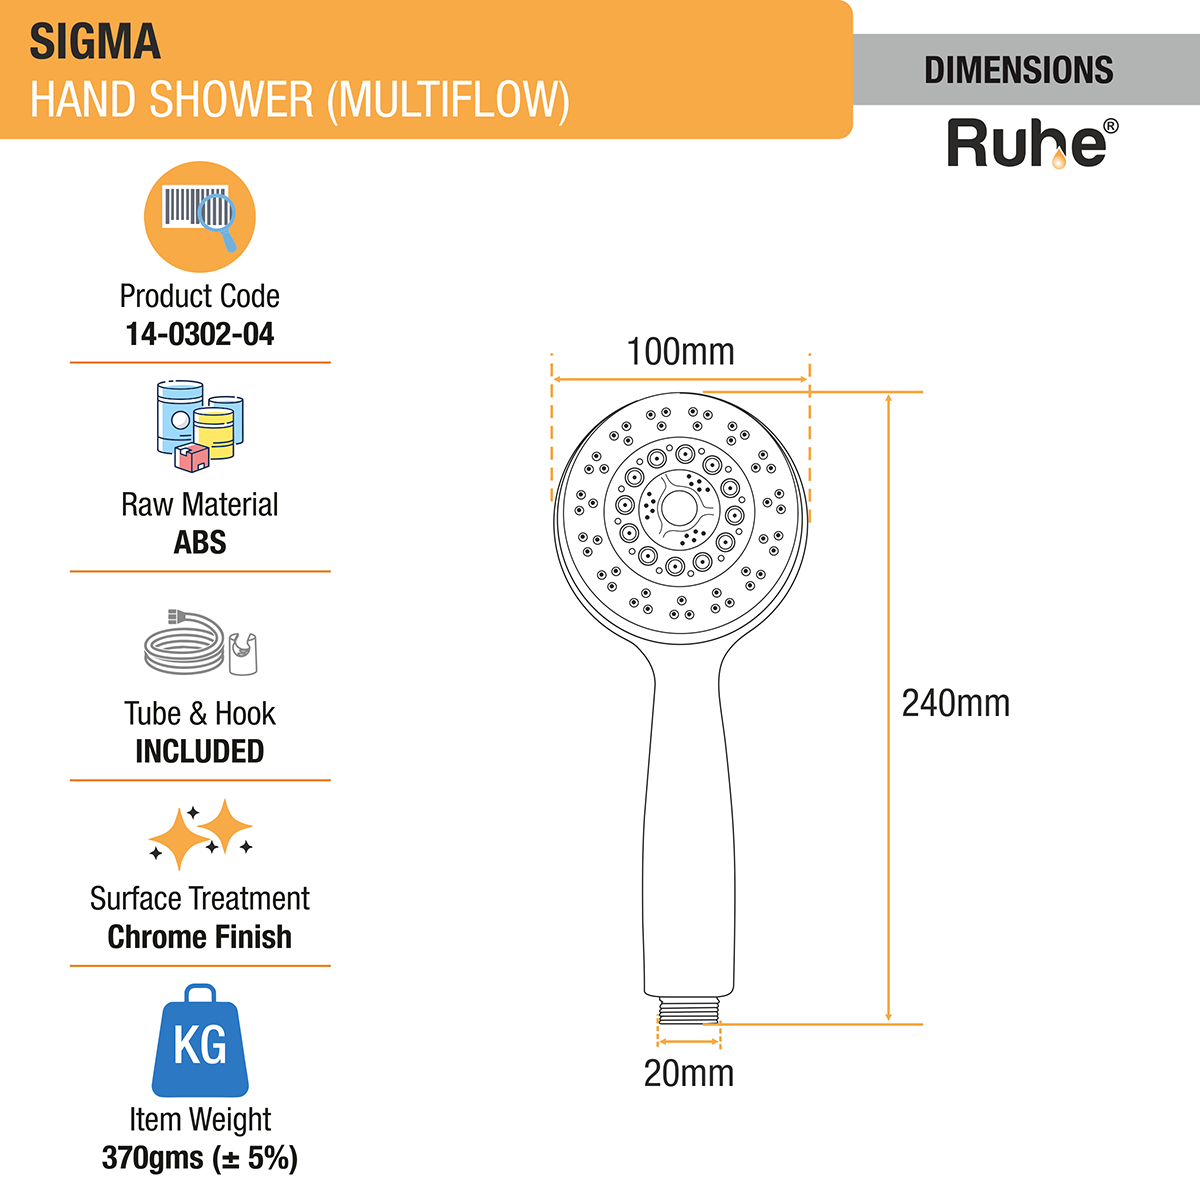 Sigma ABS Multi-Flow Hand Shower (Only Showerhead) dimensions and size